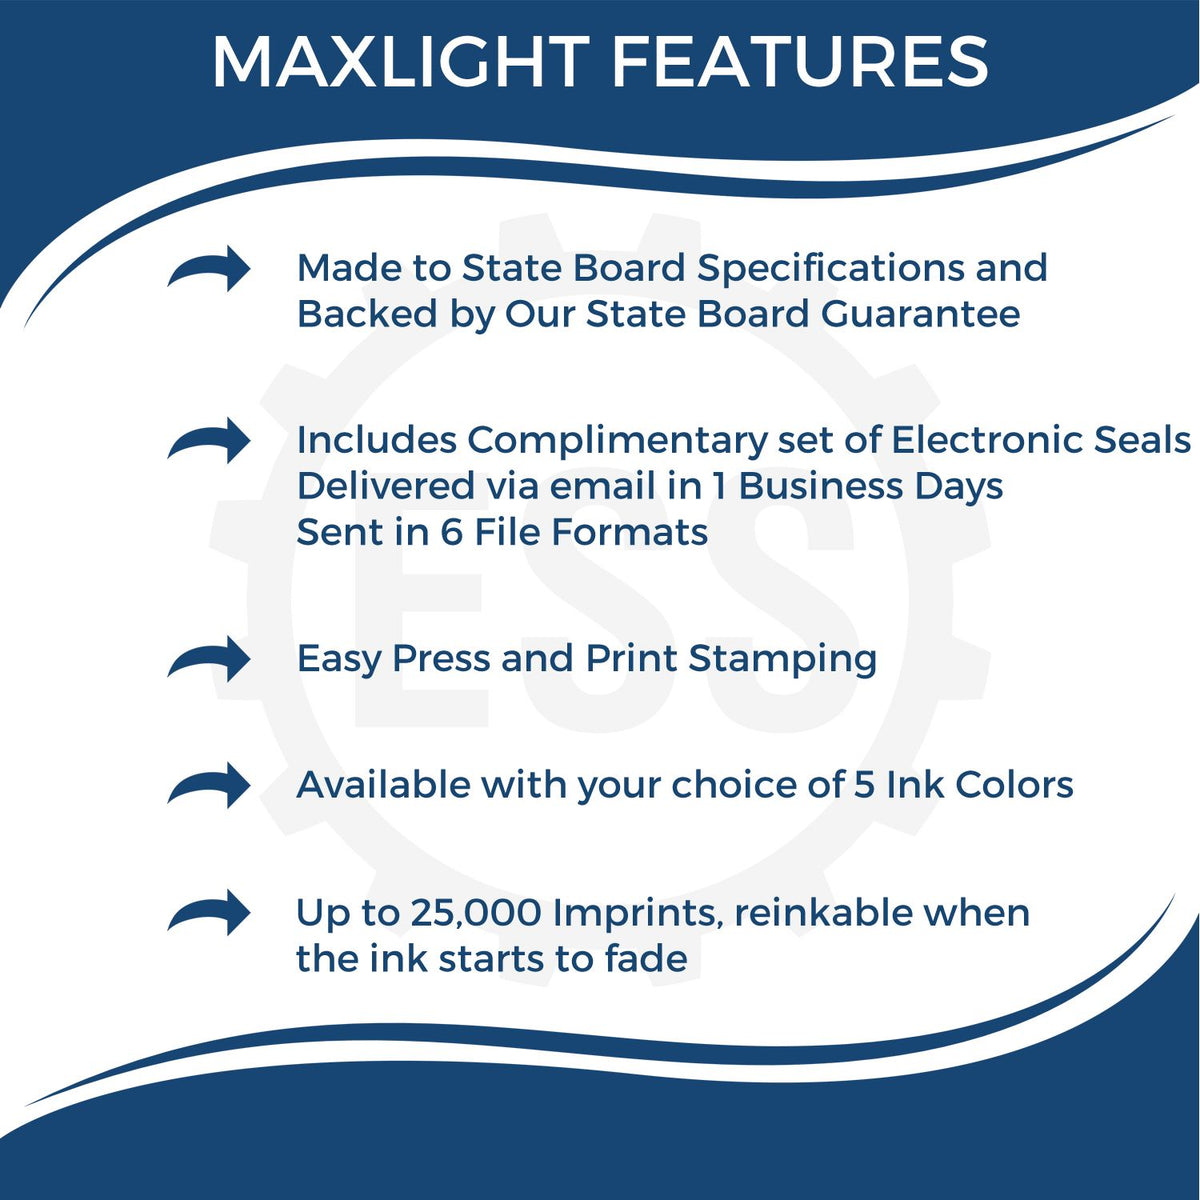 A picture of an infographic highlighting the selling points for the Premium MaxLight Pre-Inked District of Columbia Landscape Architectural Stamp